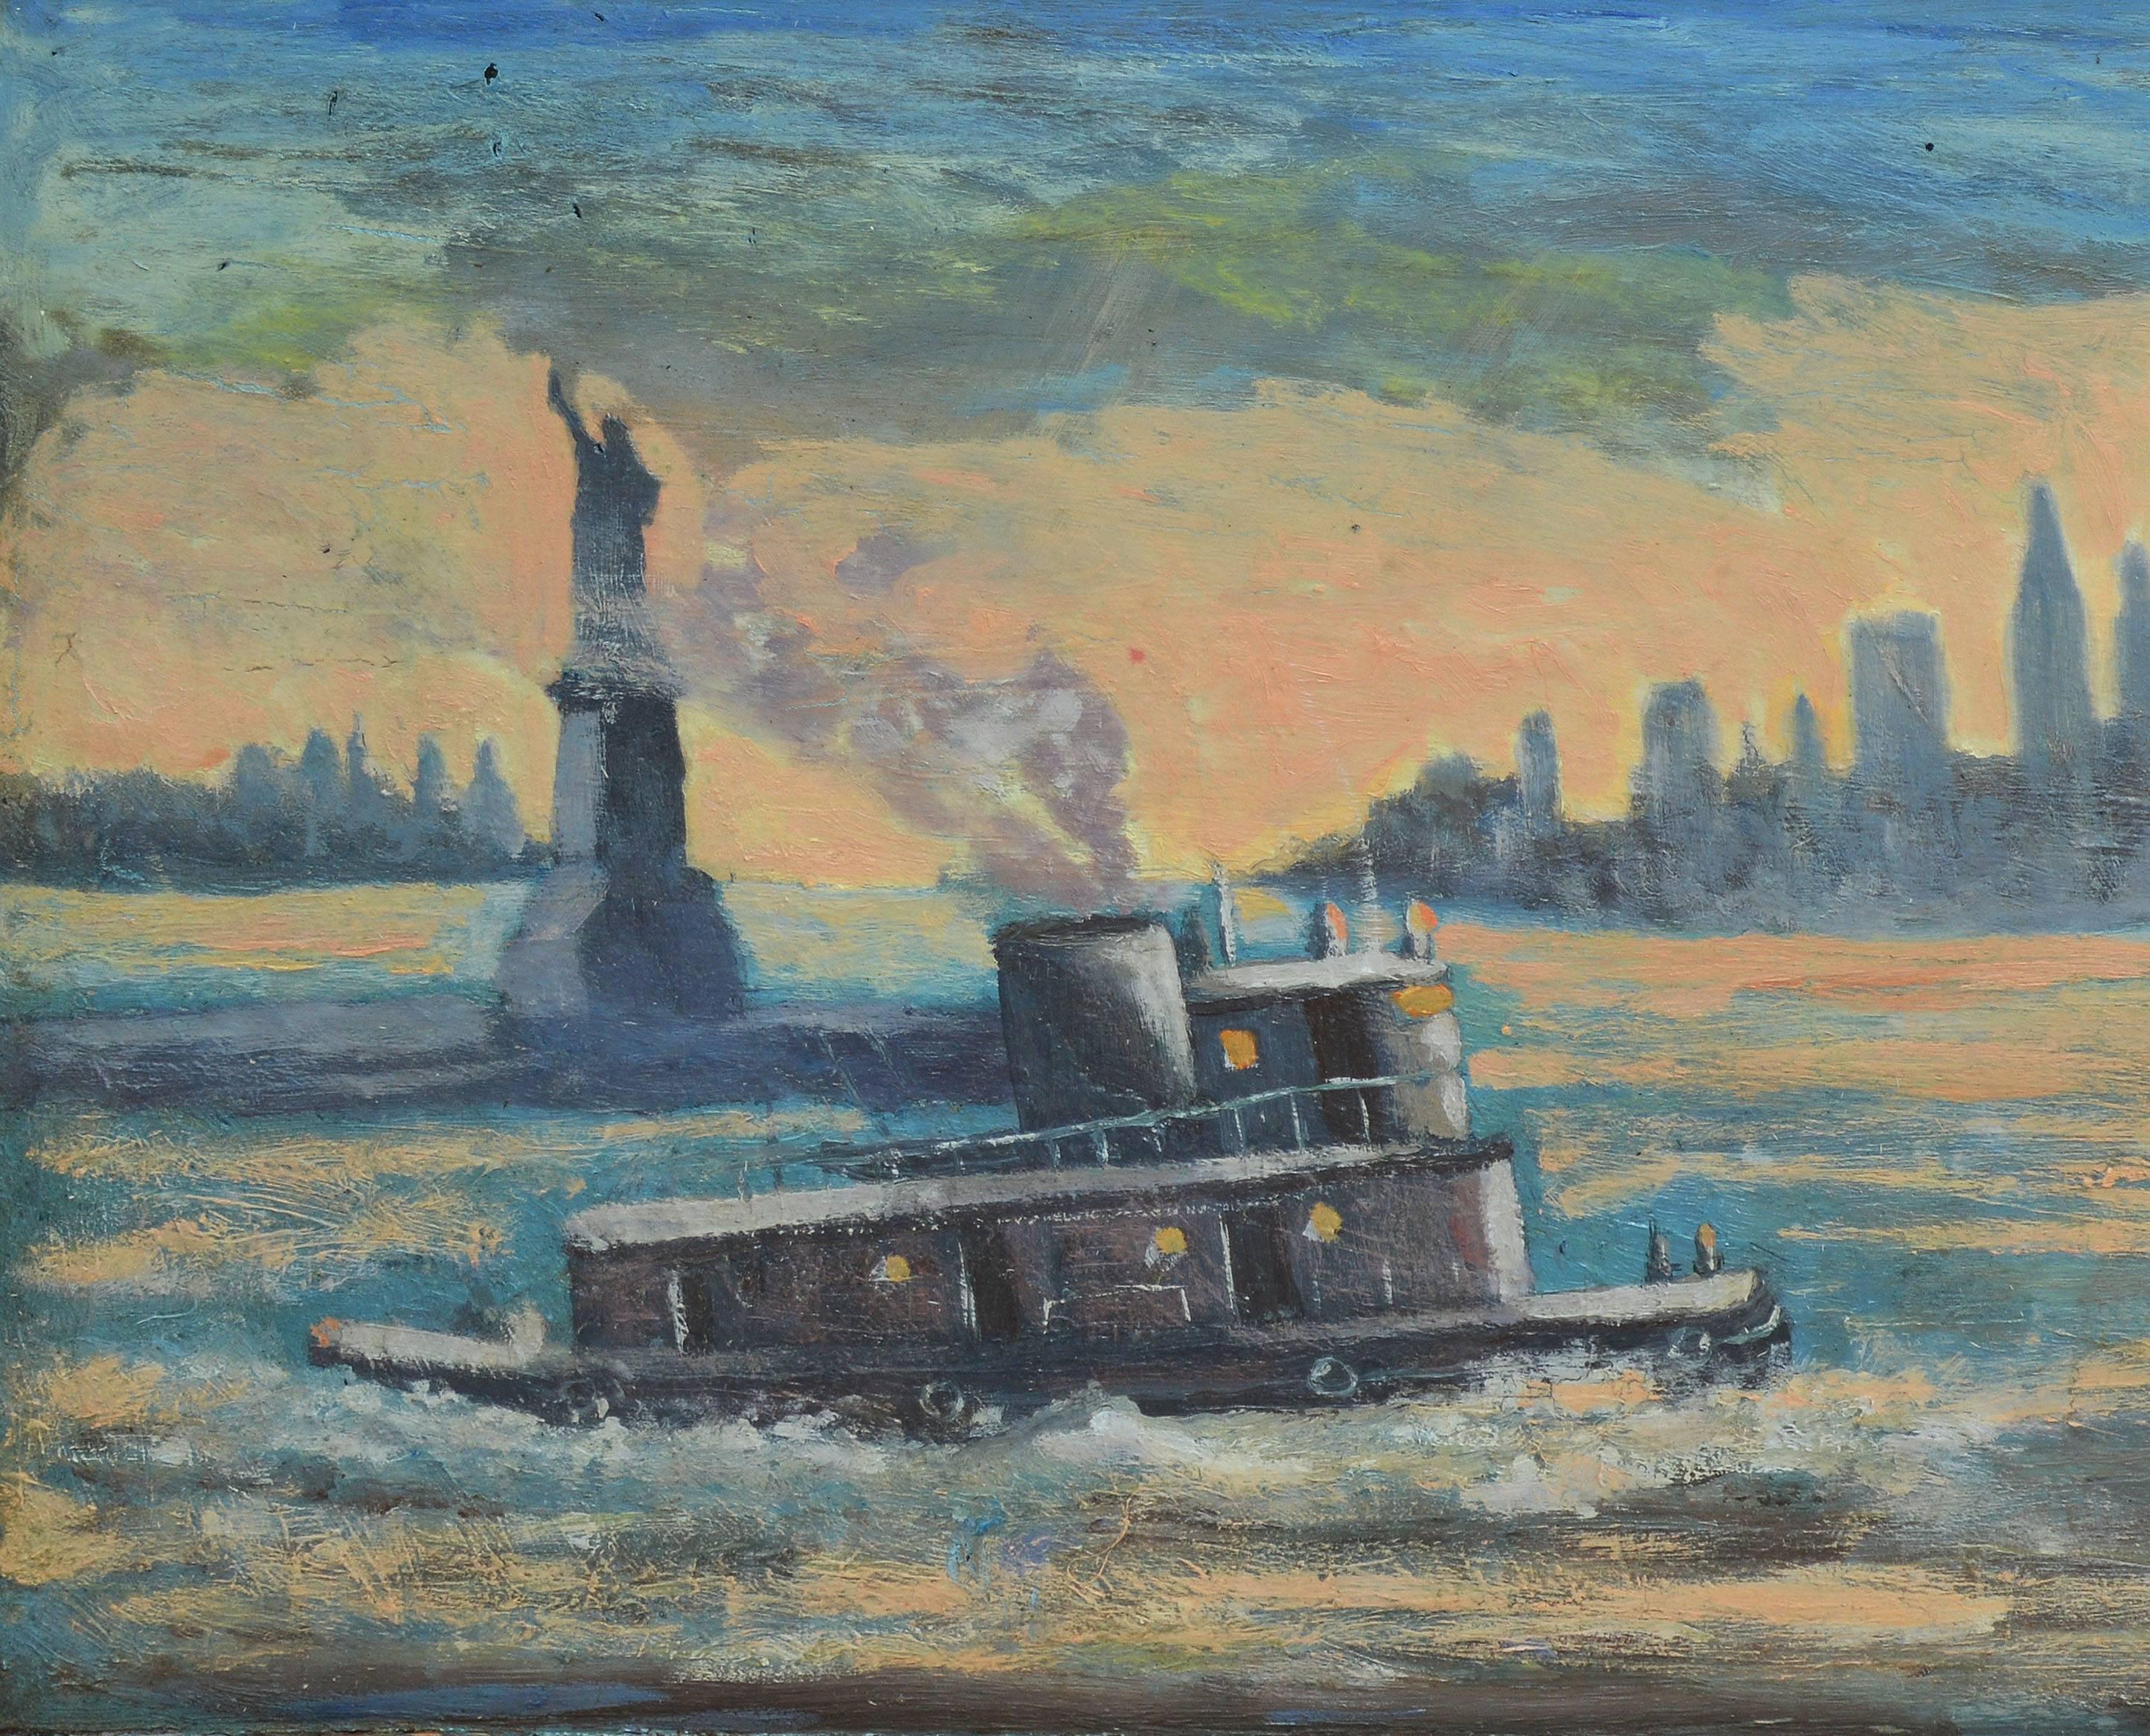 Impressionist sunset painting of New York Harbor and the Statue of Liberty.  Oil on board, circa 1920.  Signed illegibly lower right.  Displayed in a period modernist frame.  Image size, 20